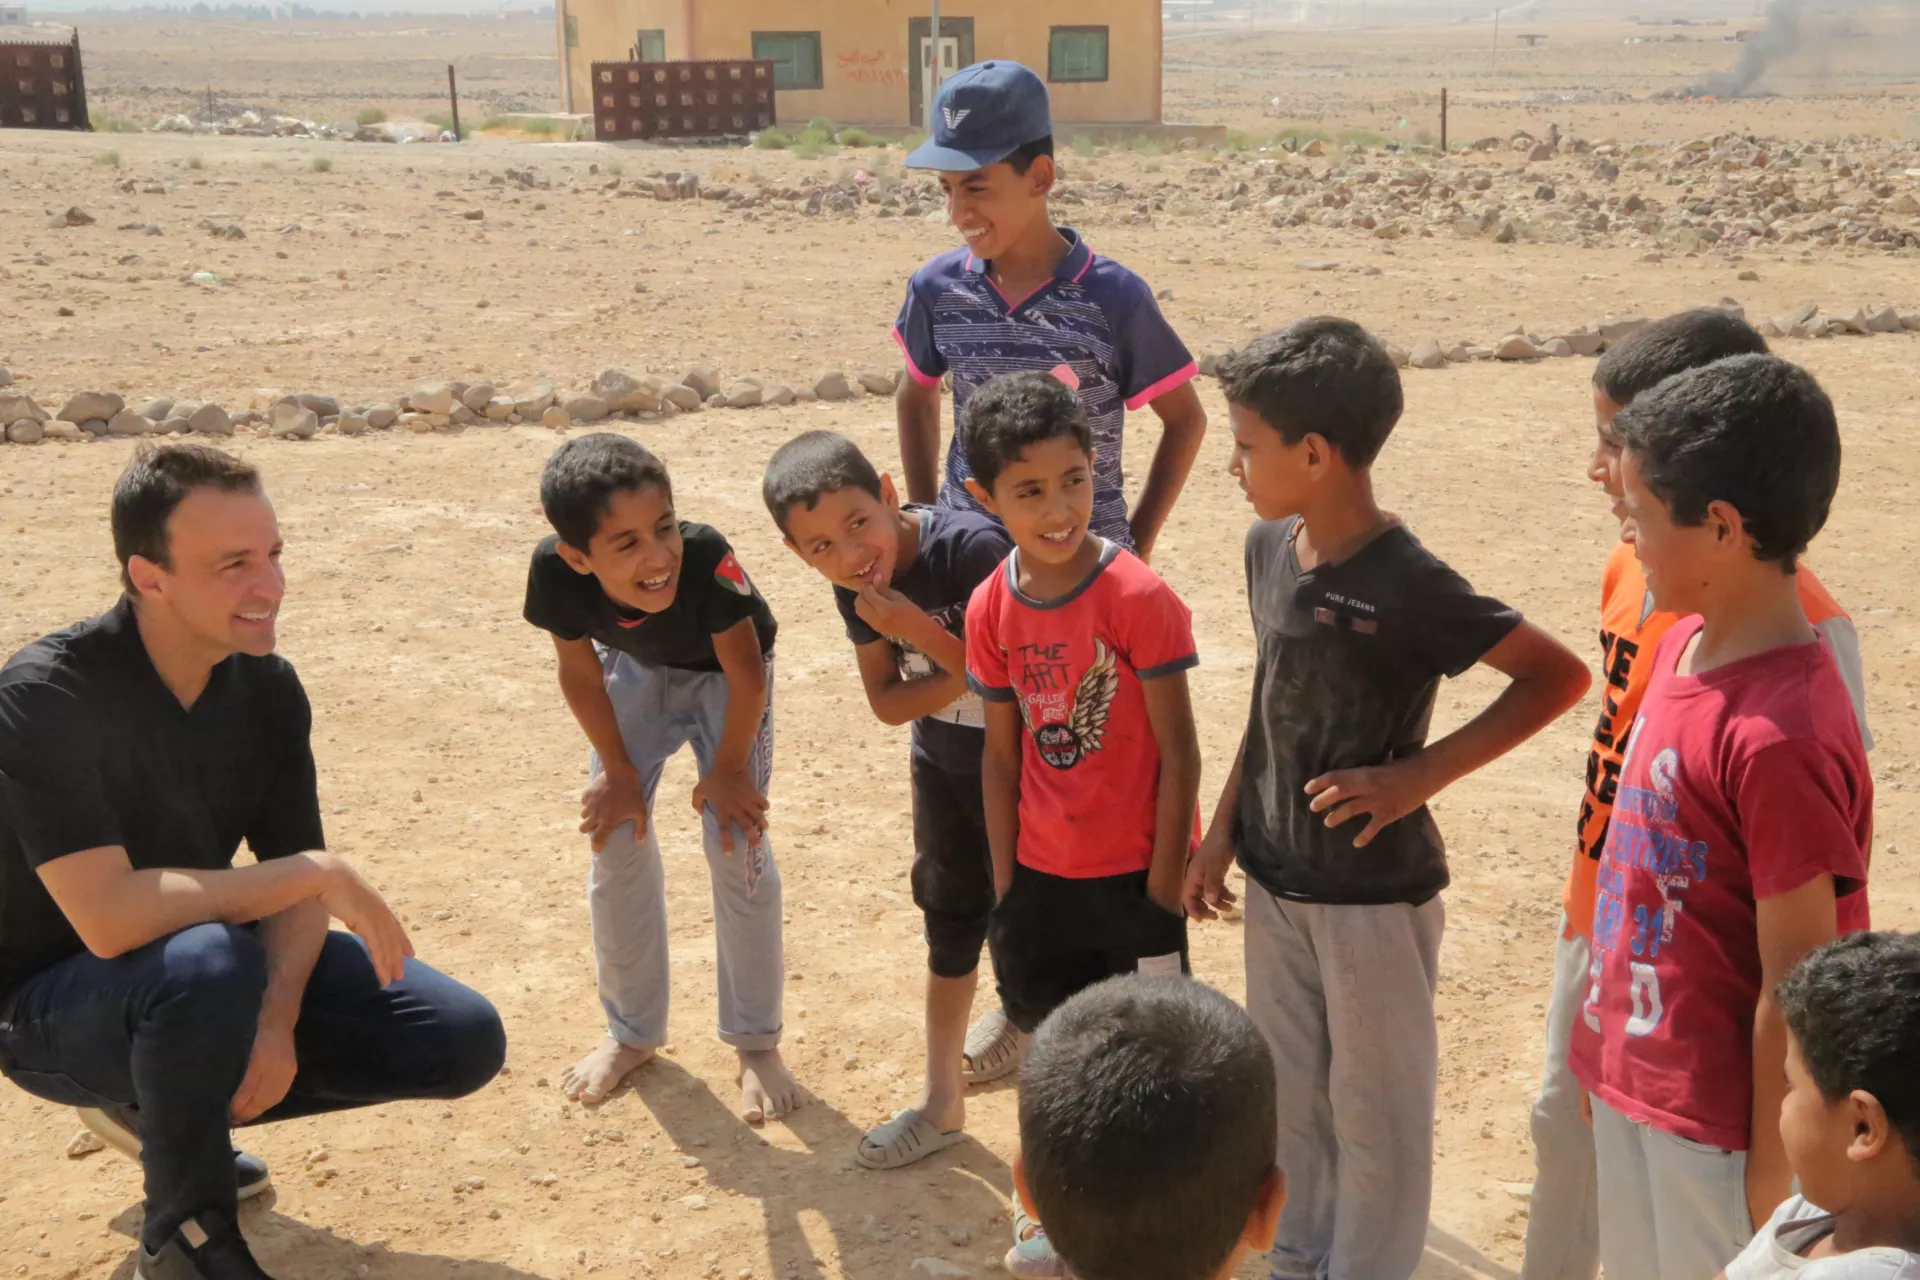 Kevin Frey witha group of kids in Mafraq, Jordan from back in 2018